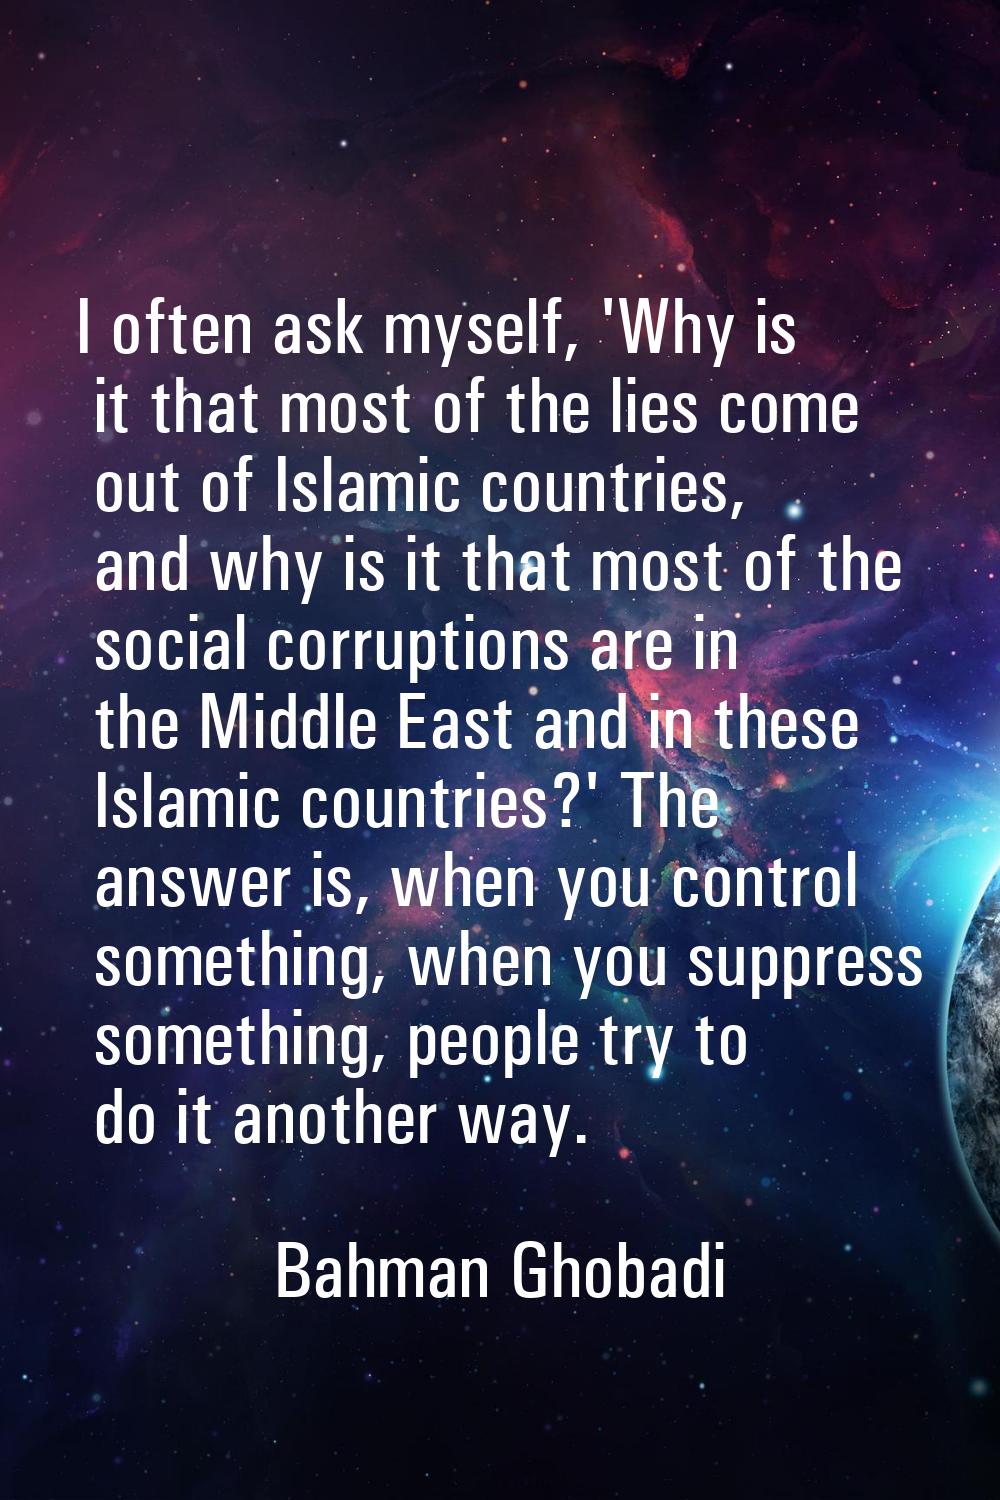 I often ask myself, 'Why is it that most of the lies come out of Islamic countries, and why is it t